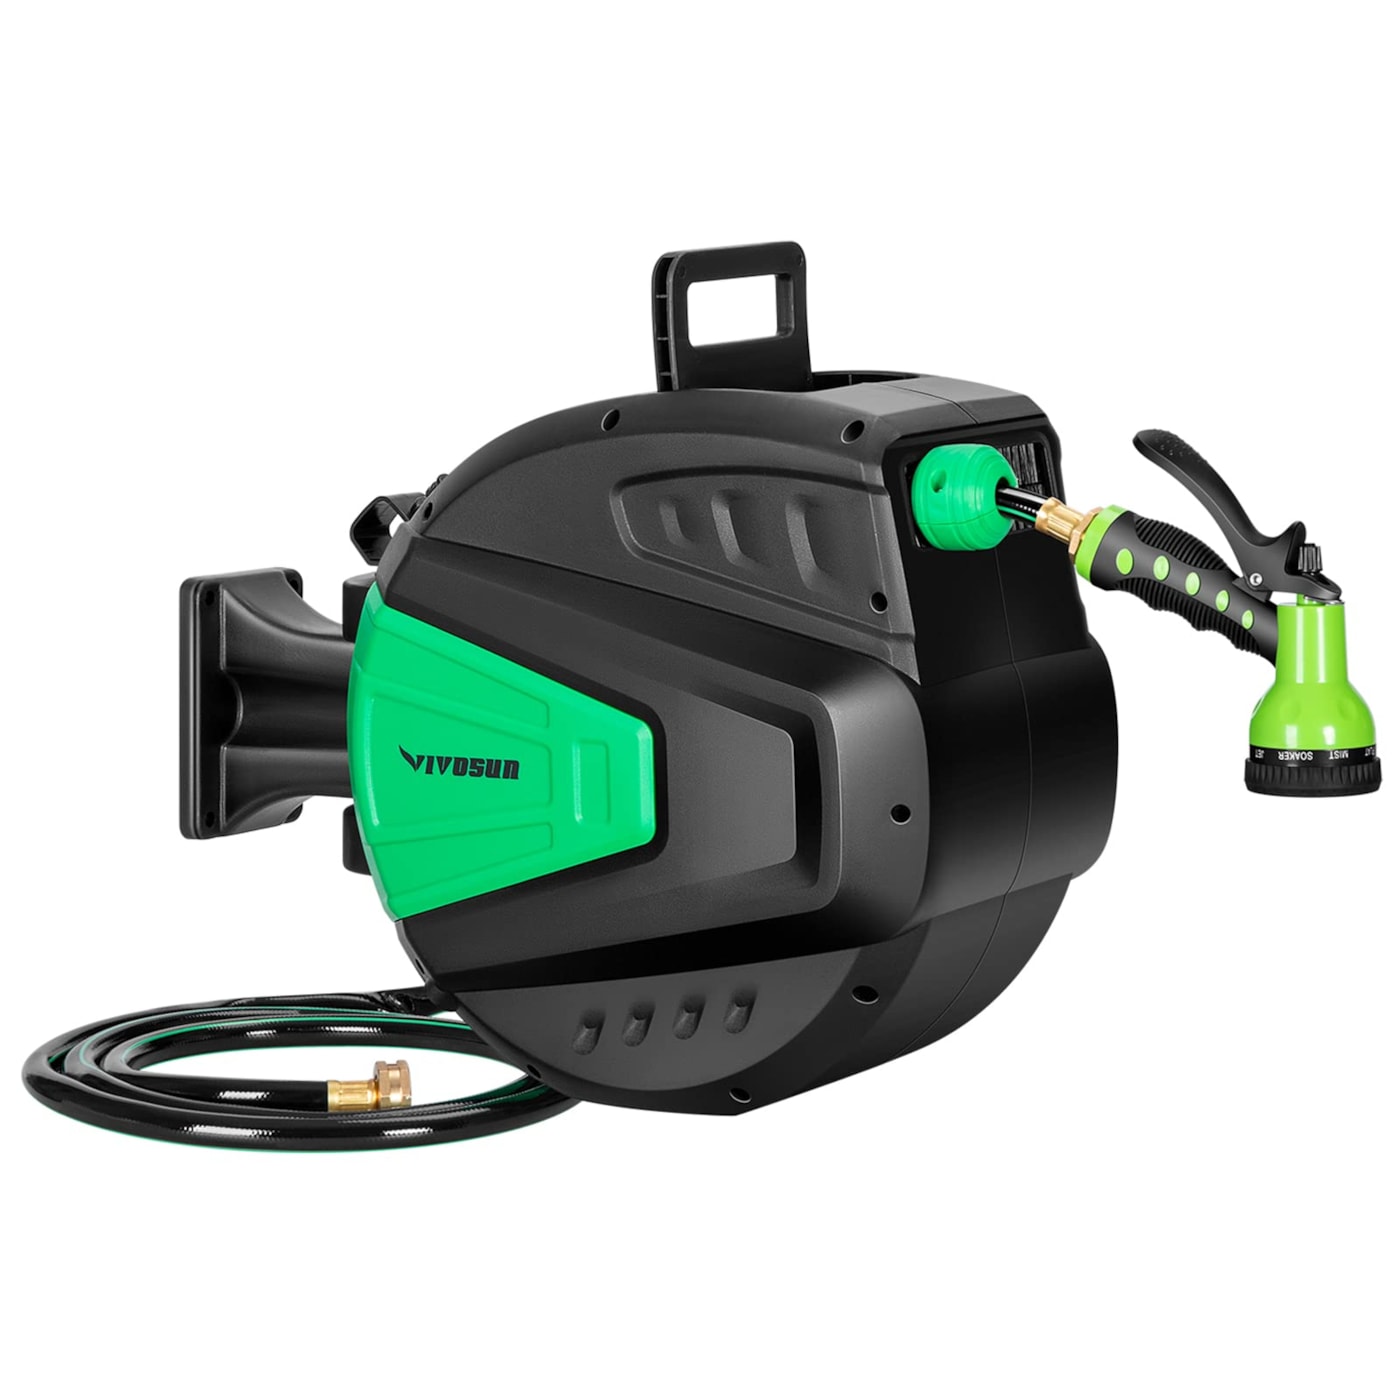 VIVOSUN 100FT Retractable Hose Reel, Wall-Mounted 1/2 Inch Automatically Rewind Garden Hose Reel with a 9-Pattern Nozzle, 180° Swivel Bracket, and Lock at Any Length